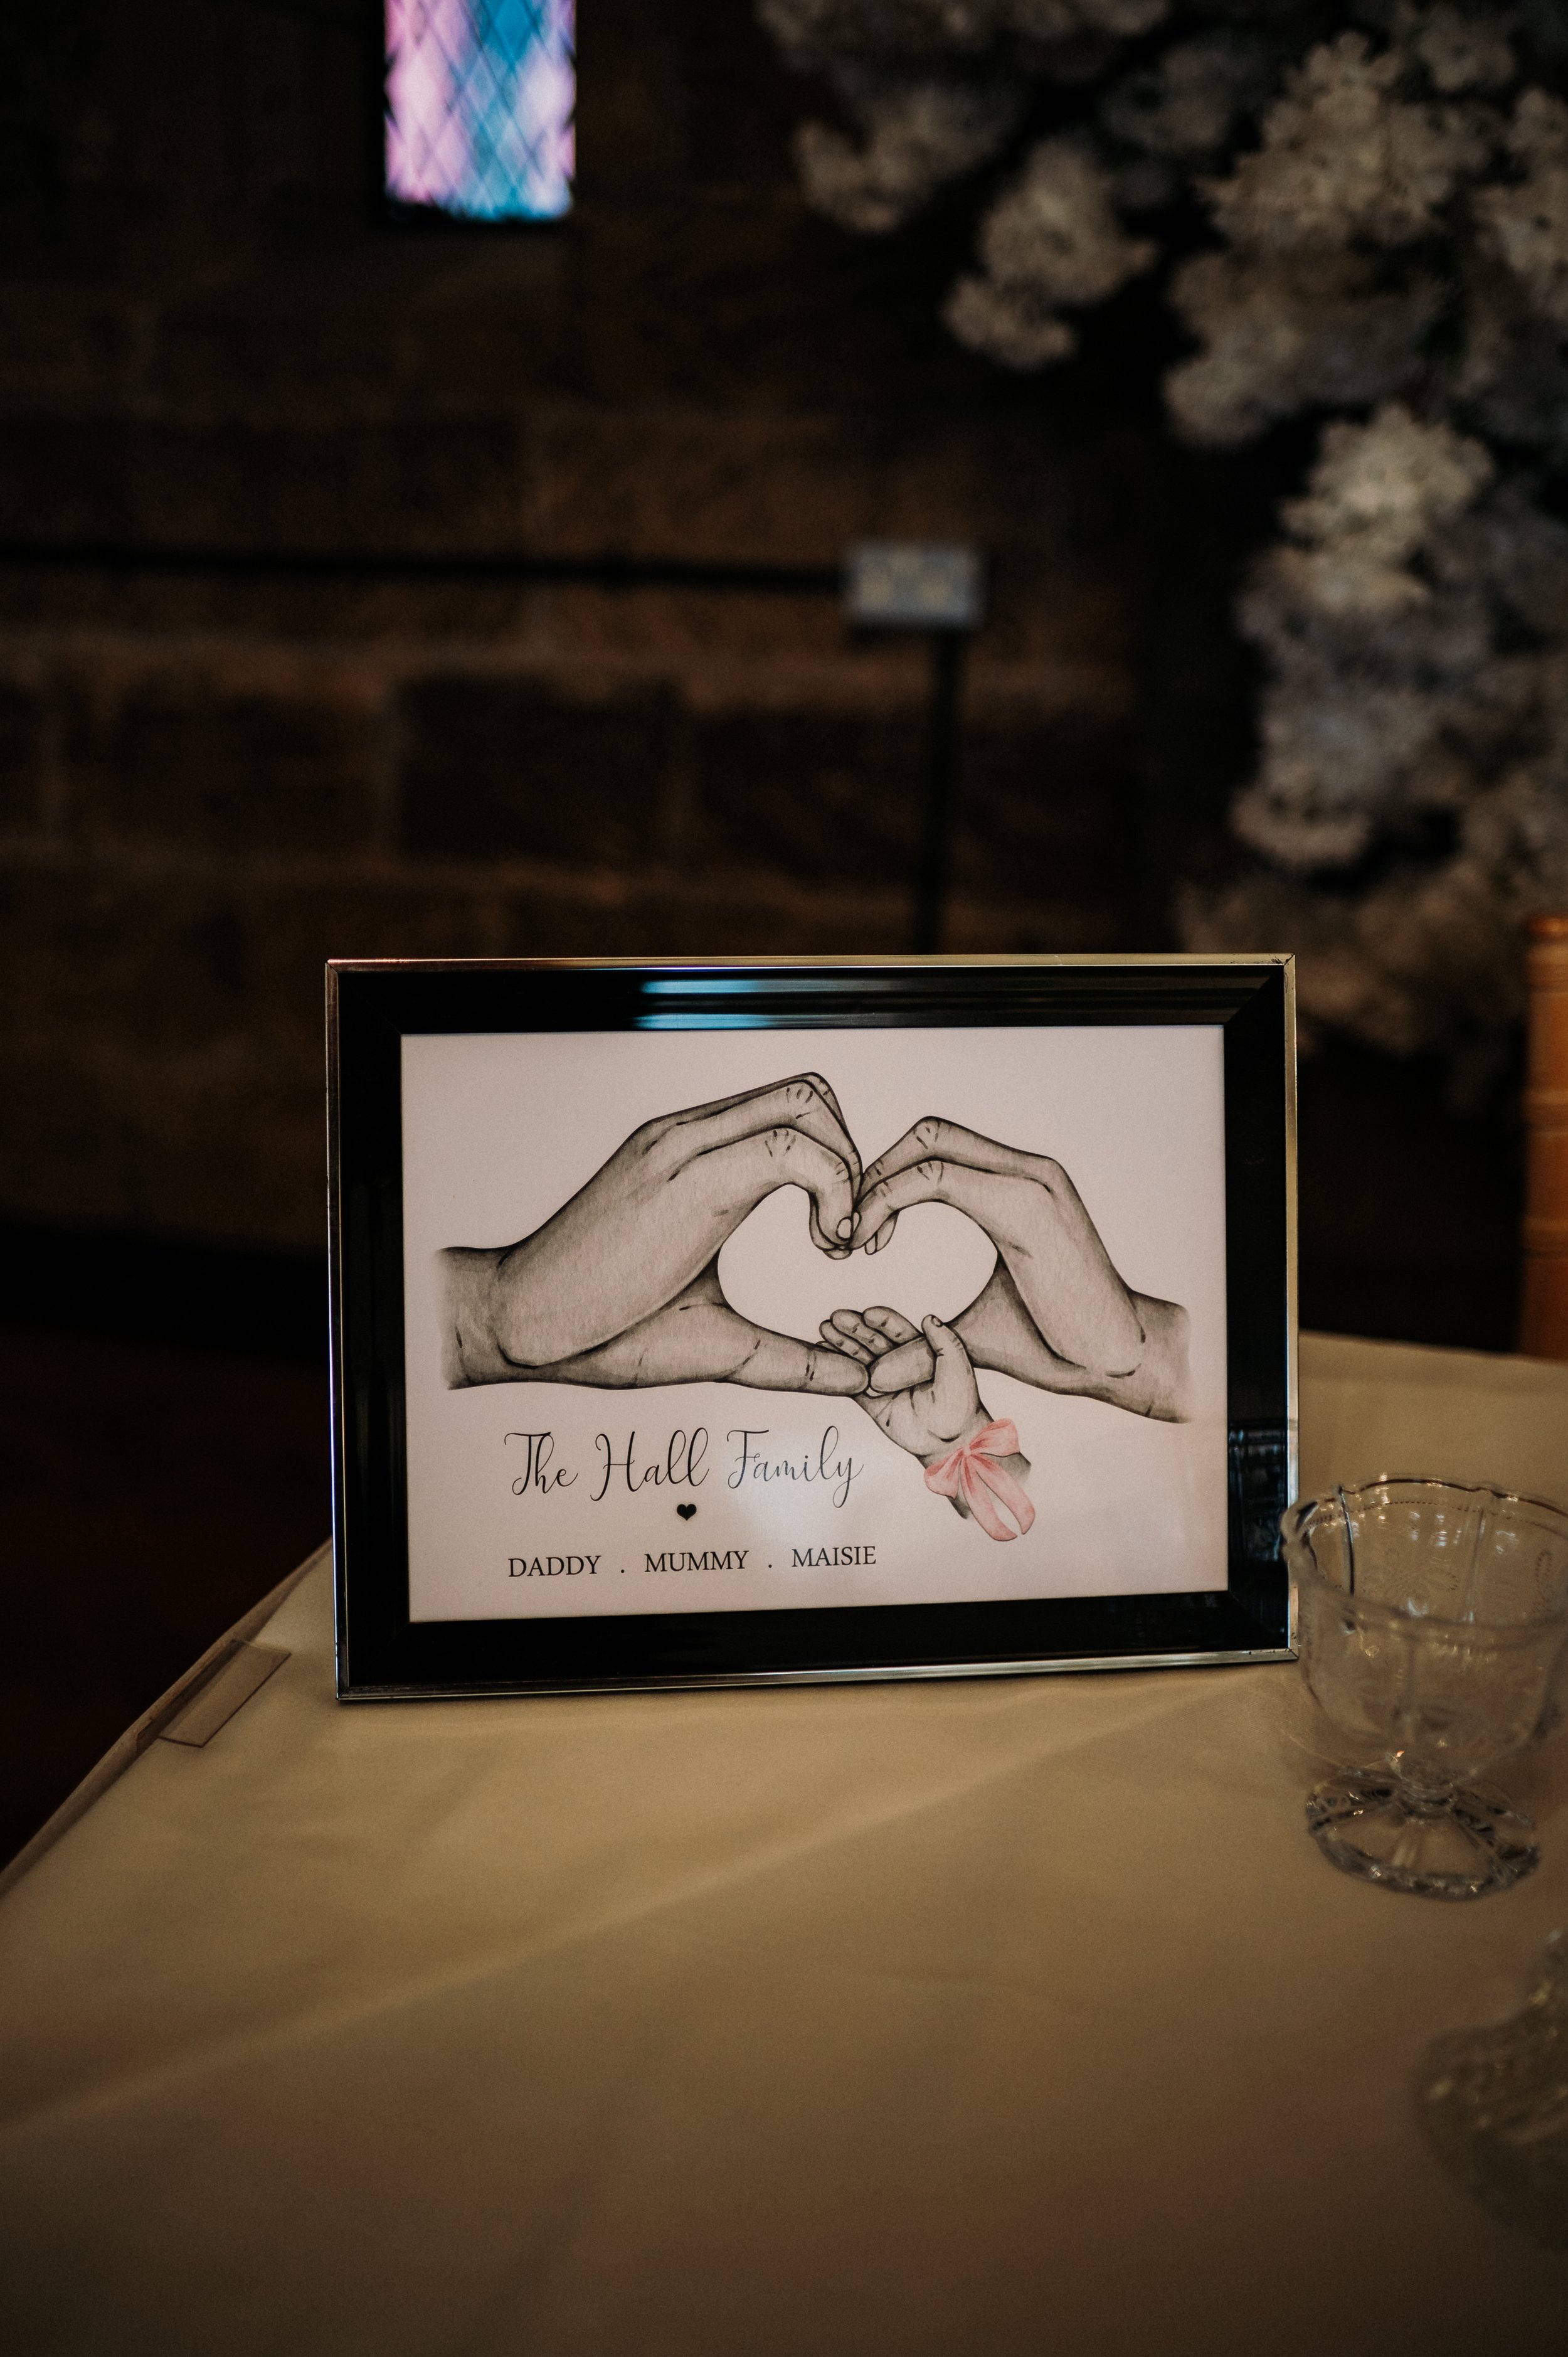 A drawn image of the bride's, groom's and their baby daughter's hands together.